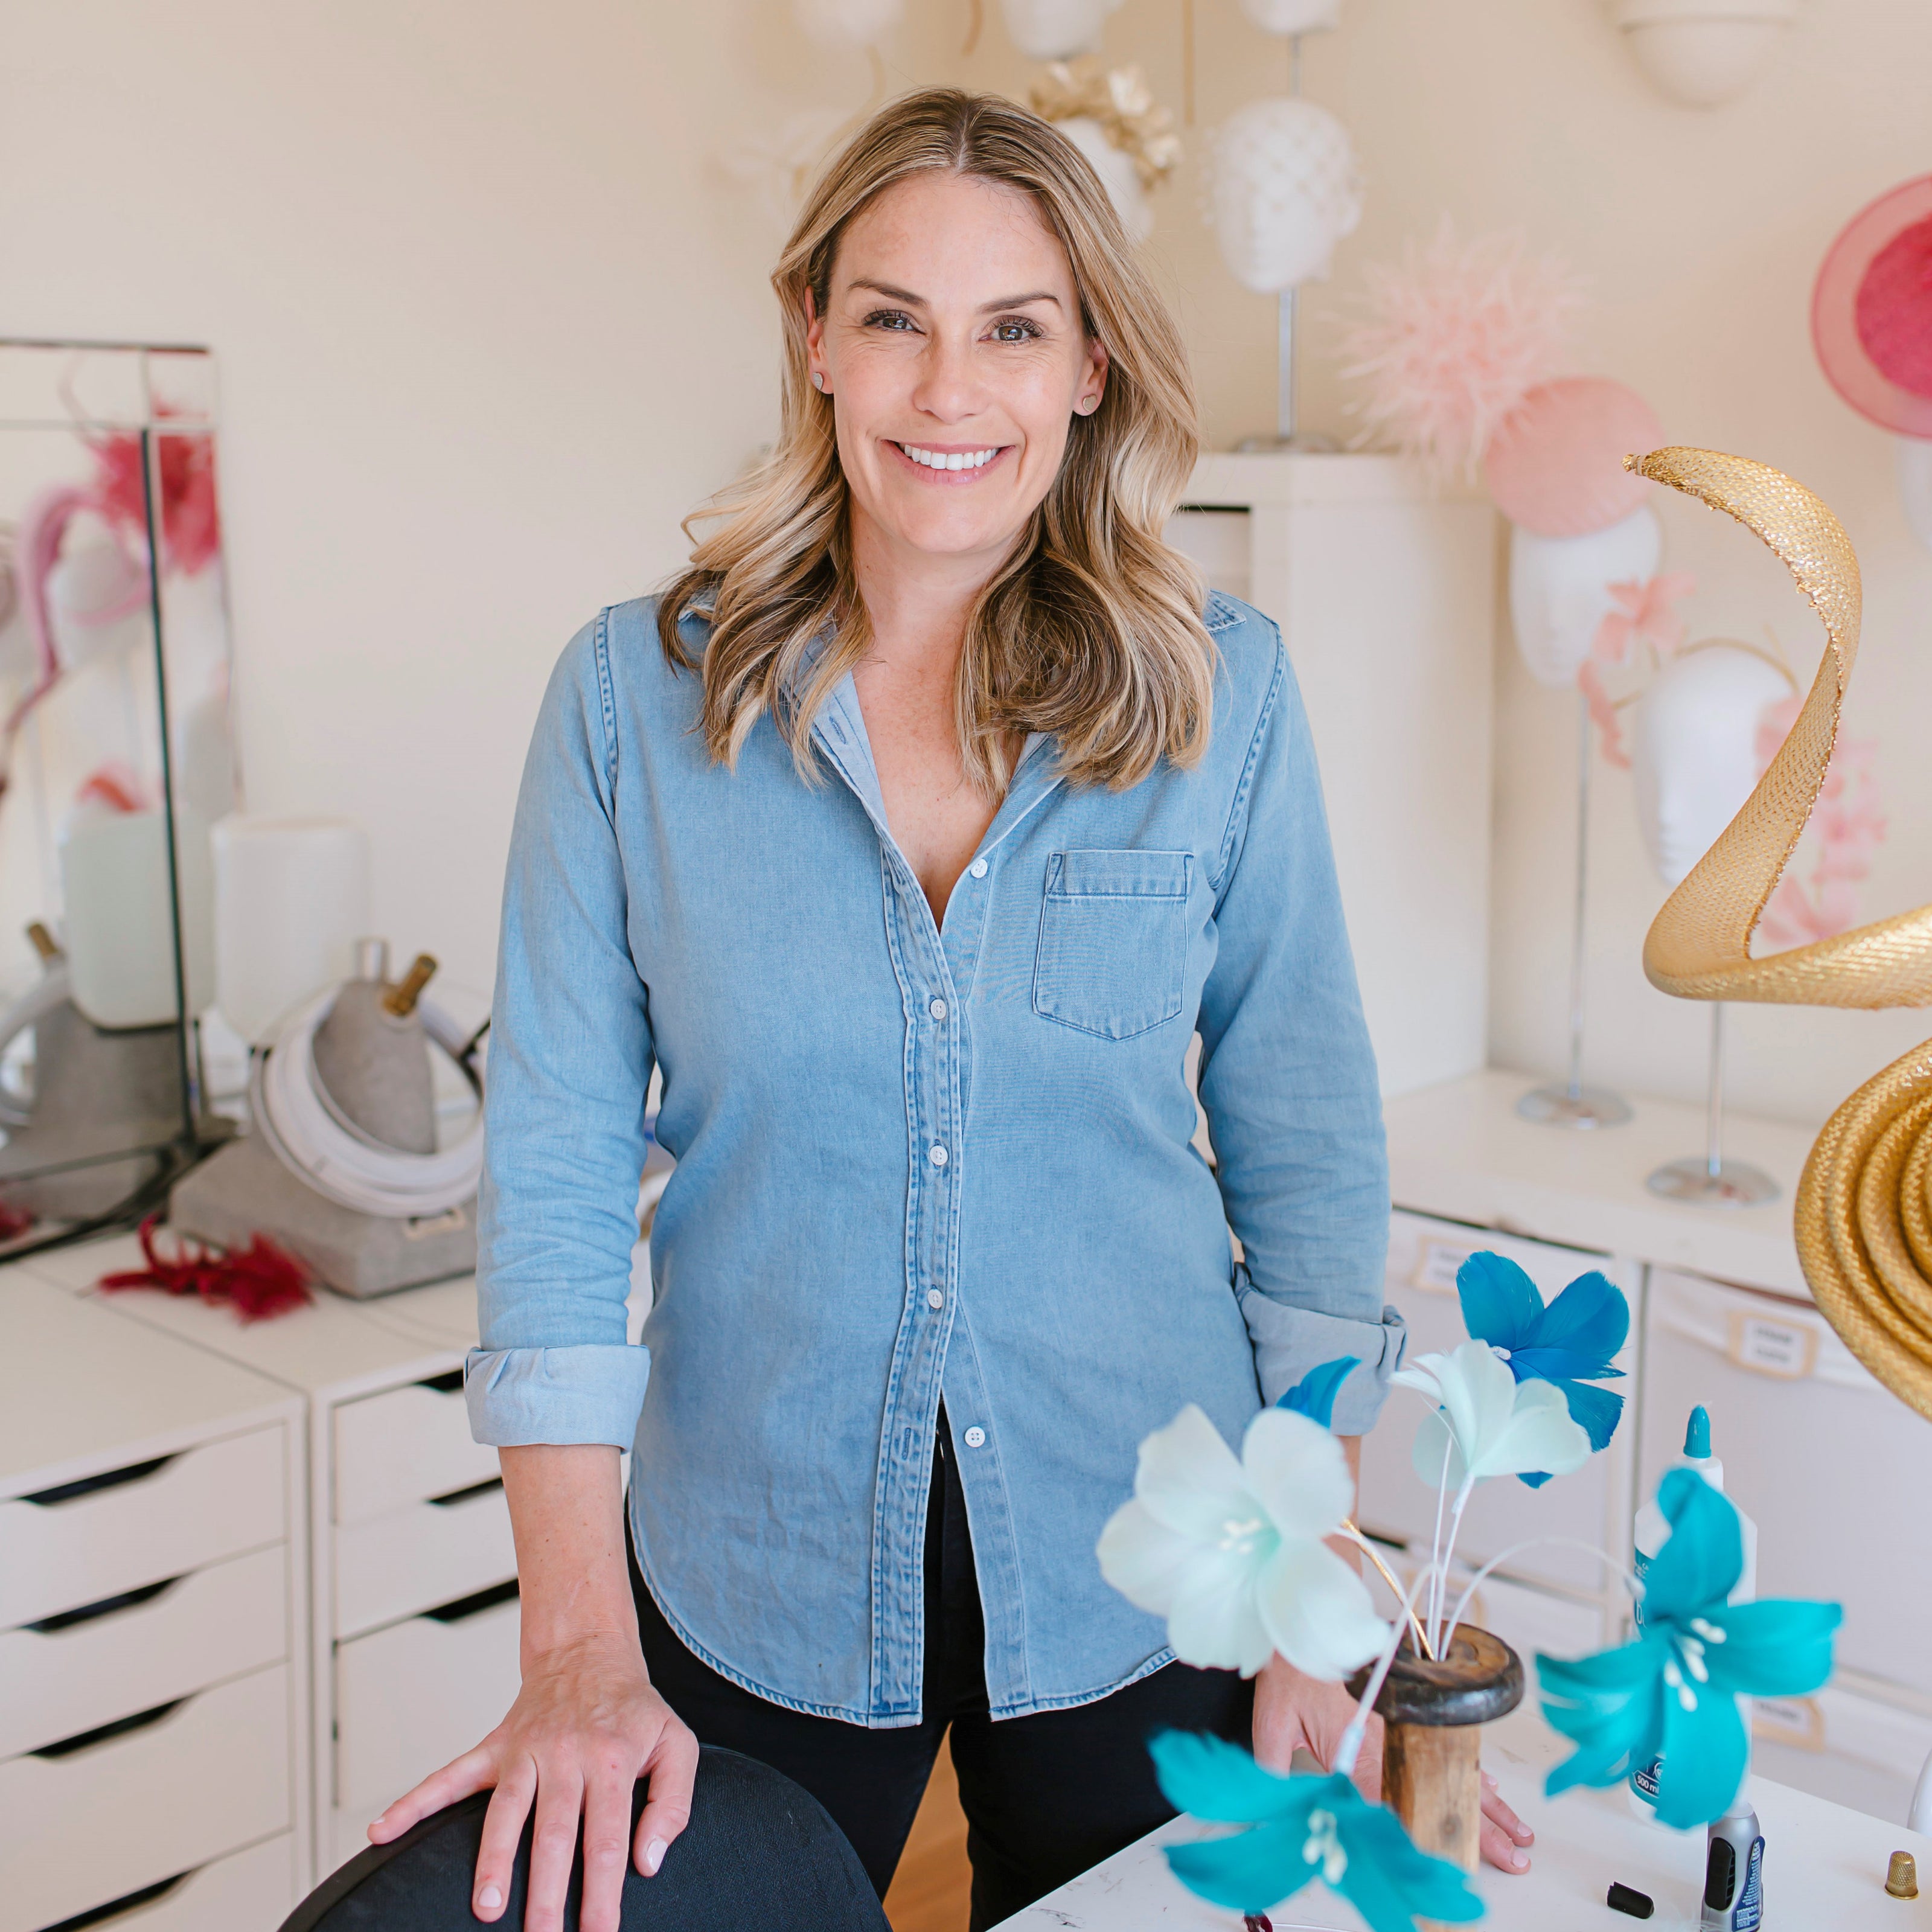 Smiling Milliner Rebeccas Share in her colourful Millinery Studio